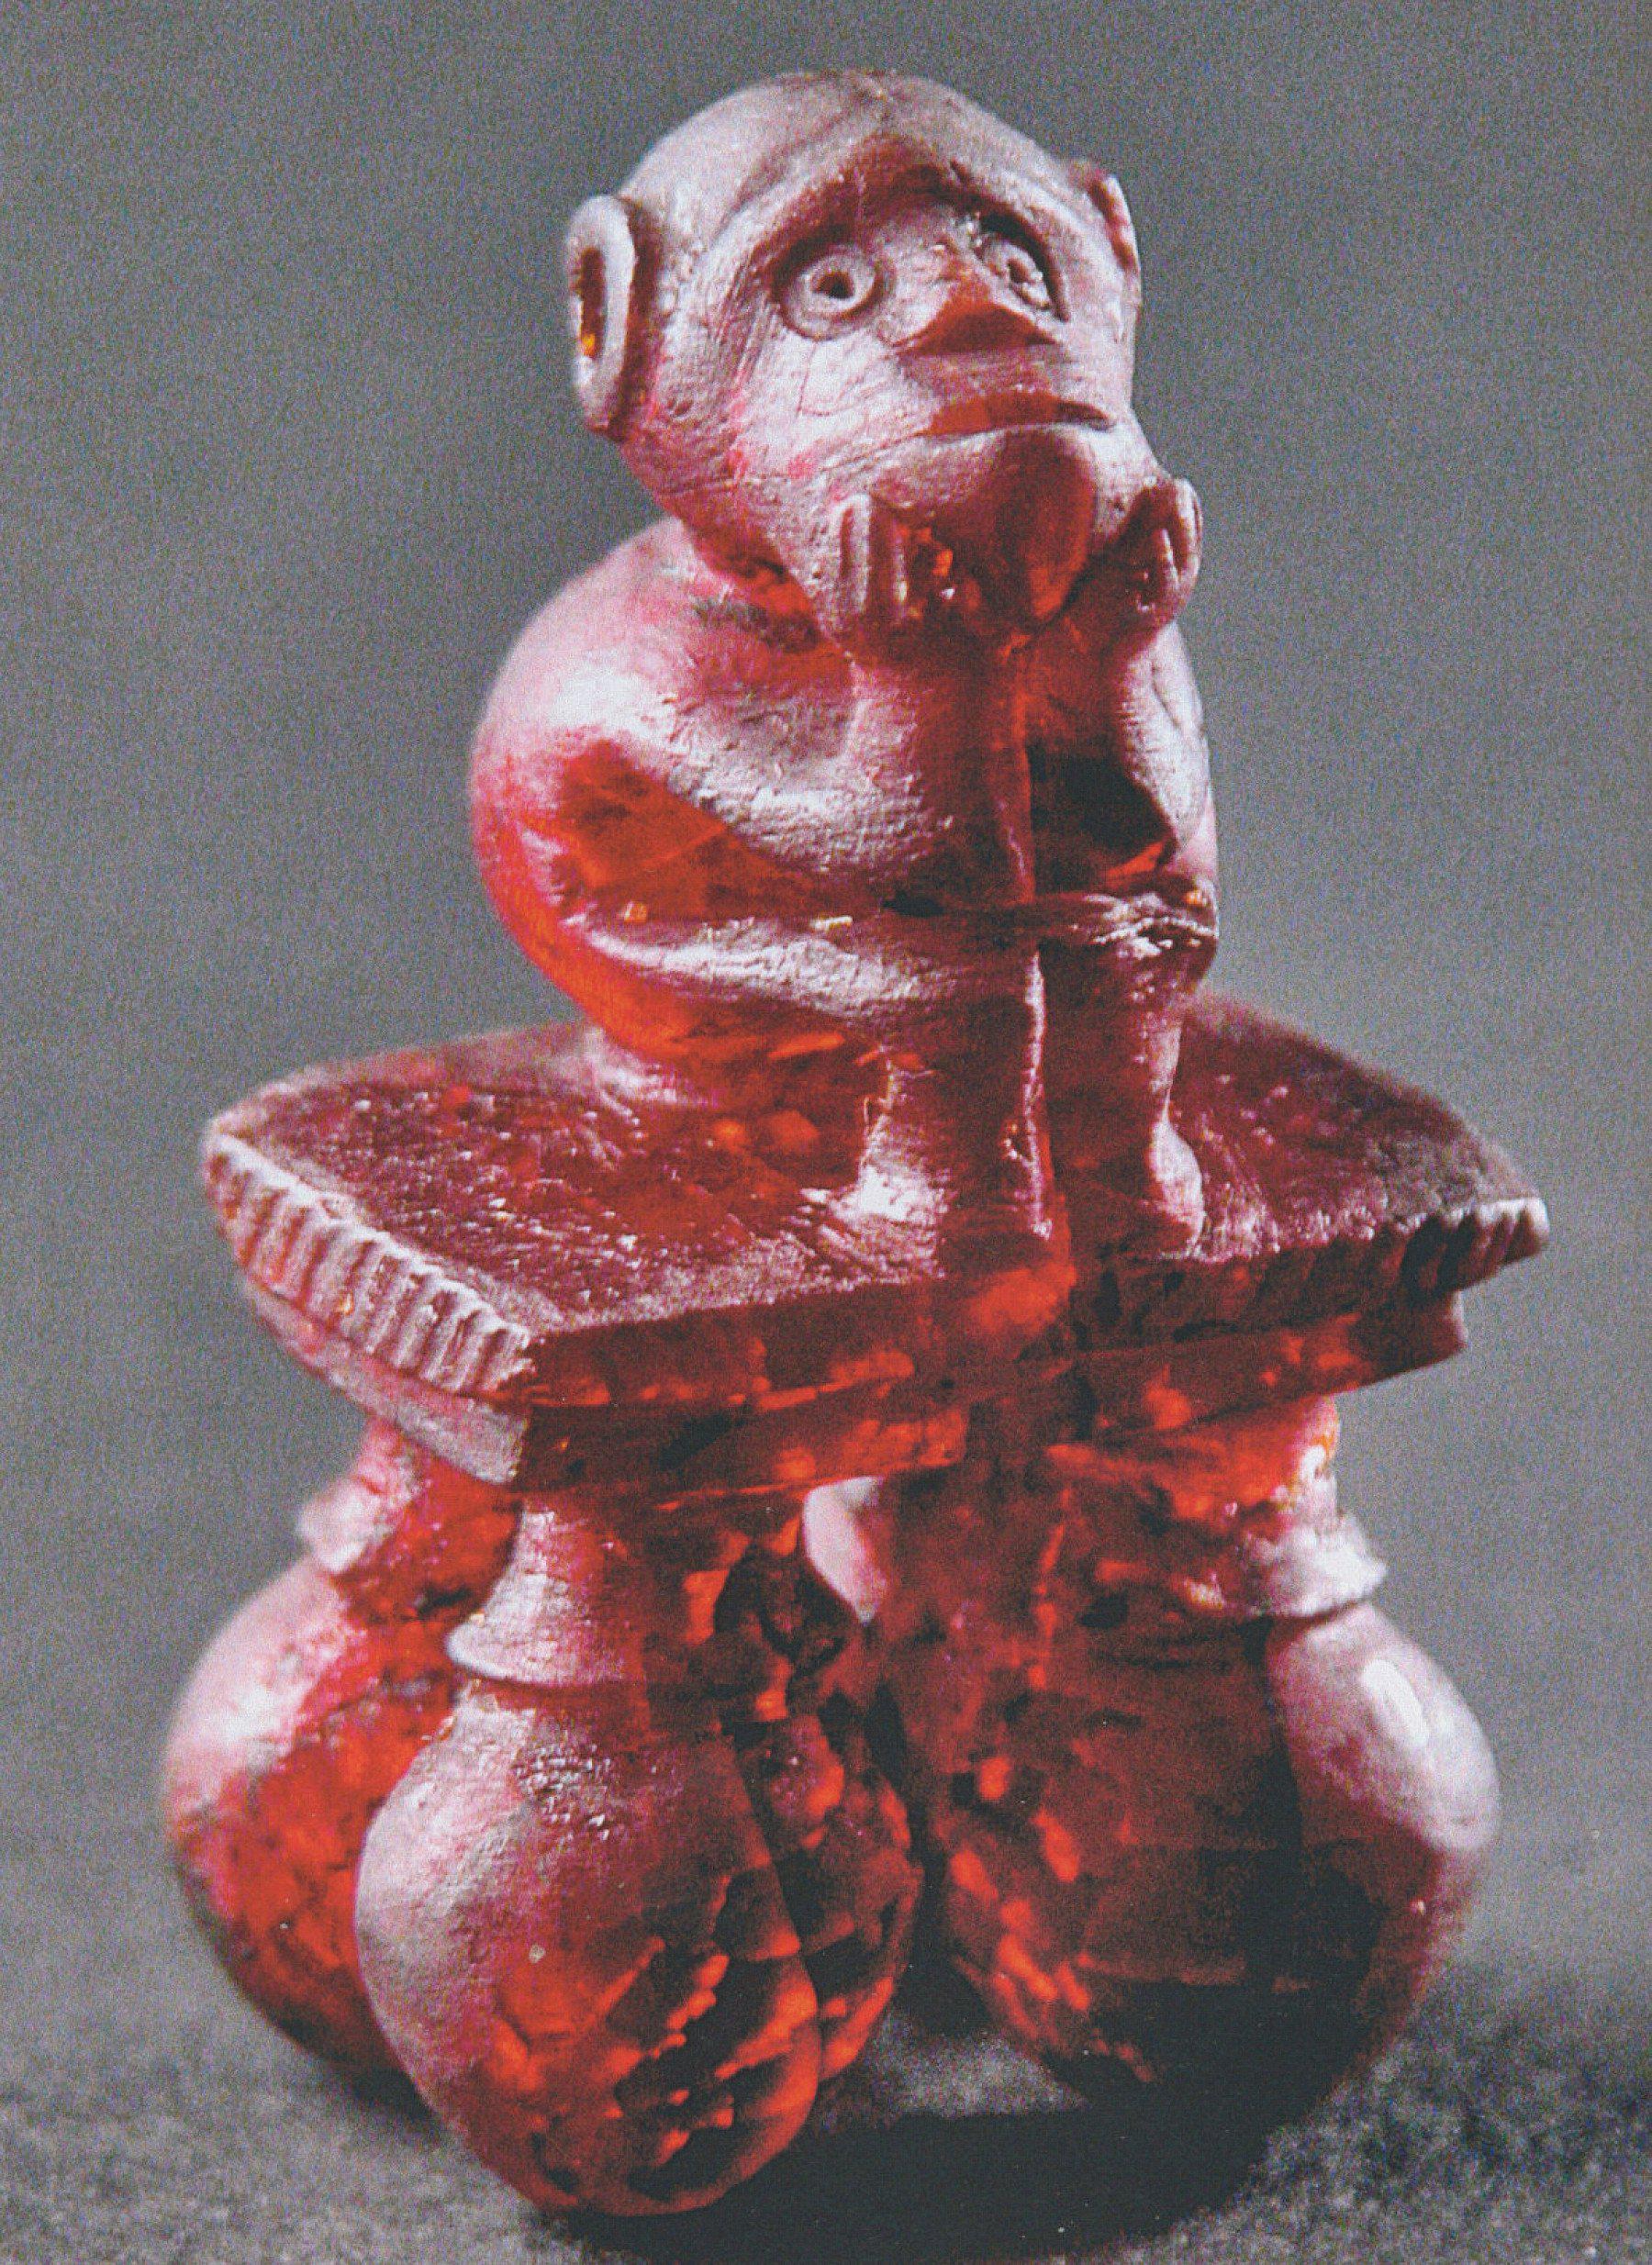 An Etruscan amber pendant in the shape of a crouching monkey. Height 4.7 cm, found in Vetulonia in Italy, dating late 8th-early 7th century BCE.jpeg